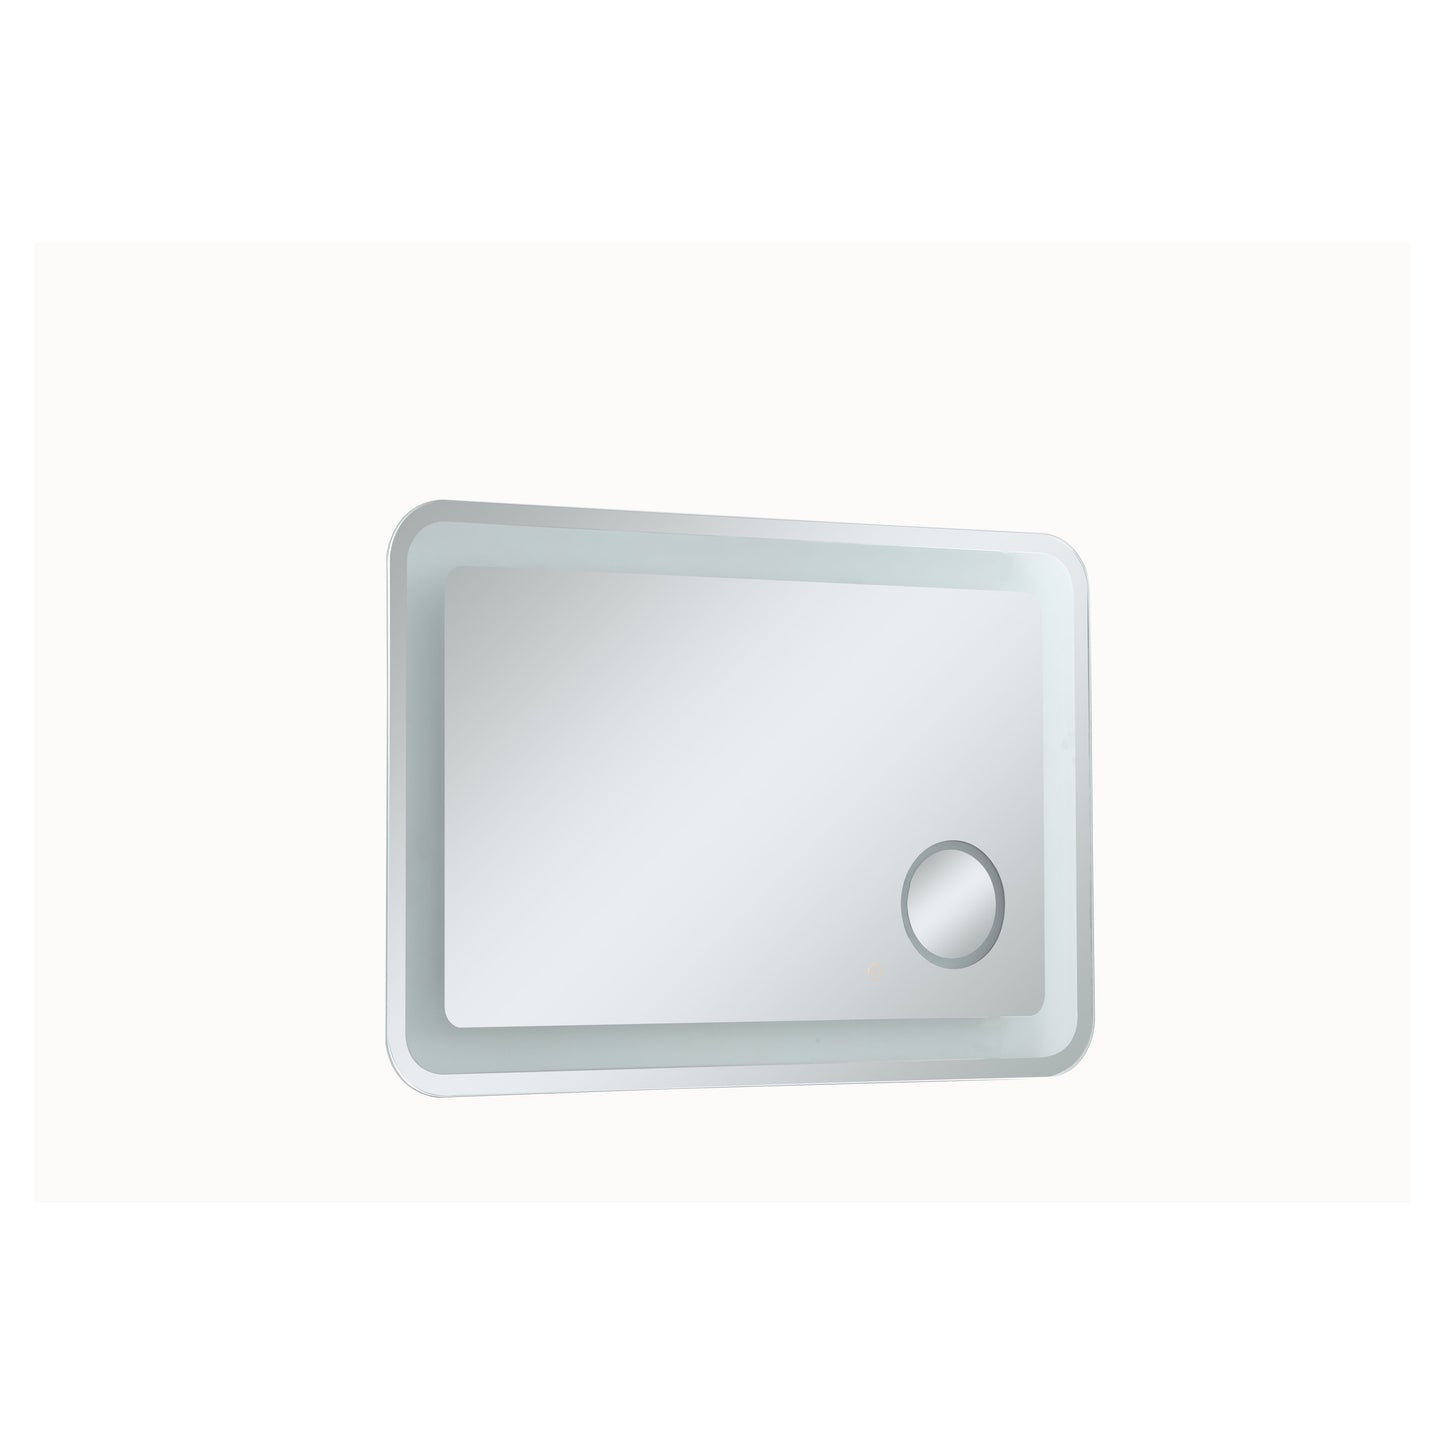 MRE52740 Lux 40" x 27" LED Mirror in Glossy White - Adjustable Color Temp